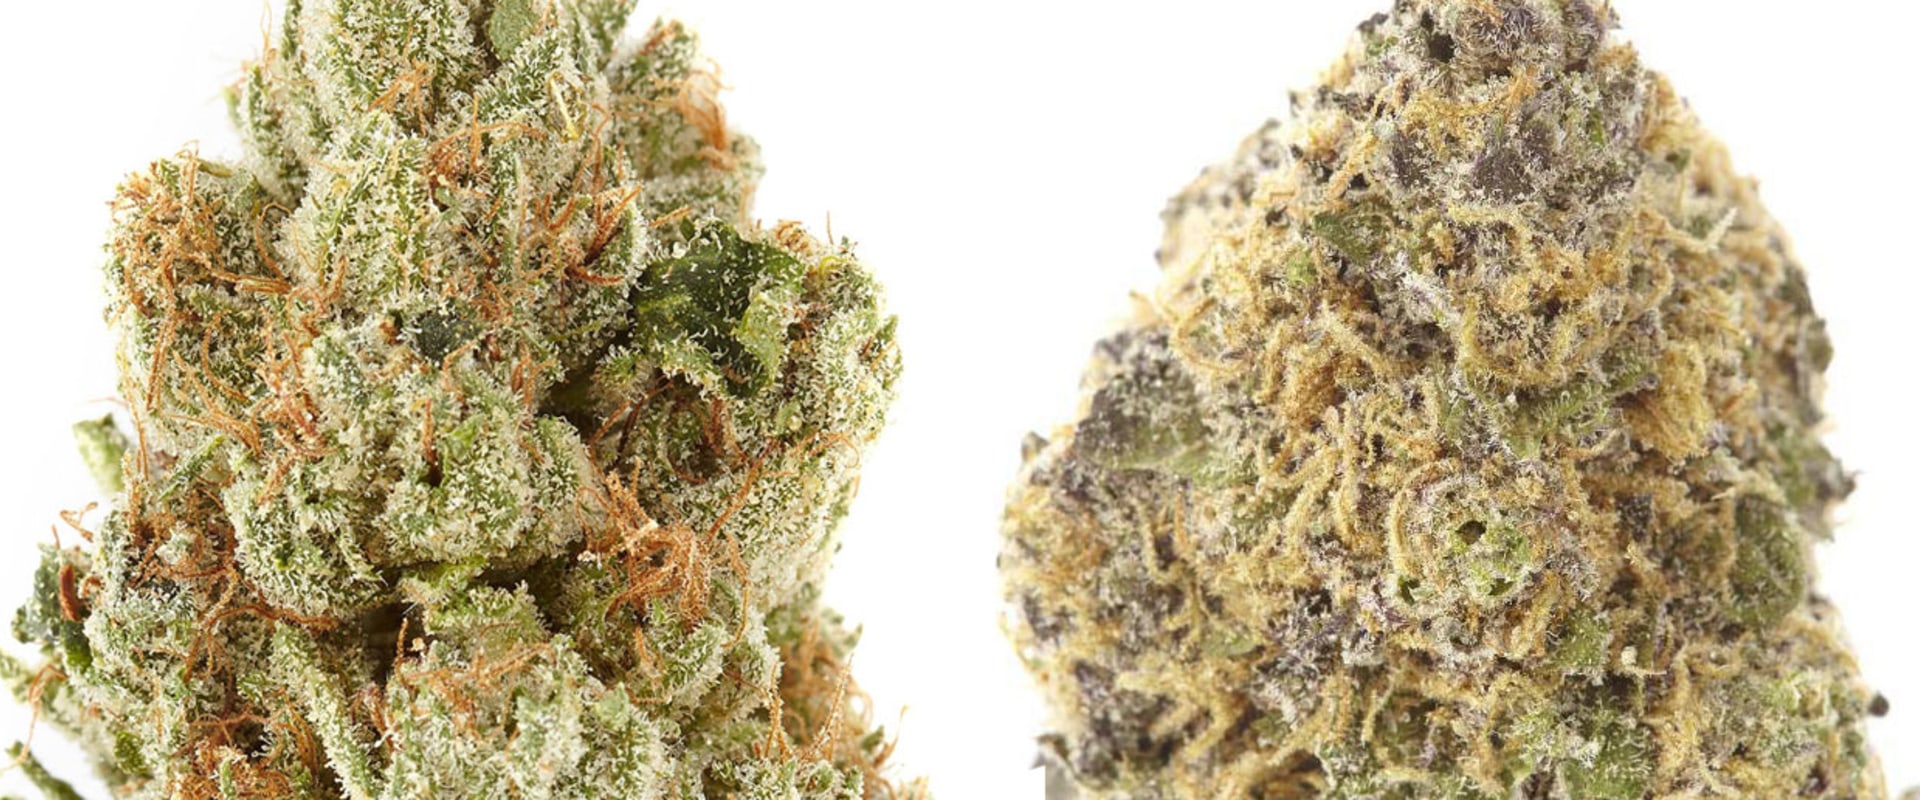 Does sativa or indica really make a difference?